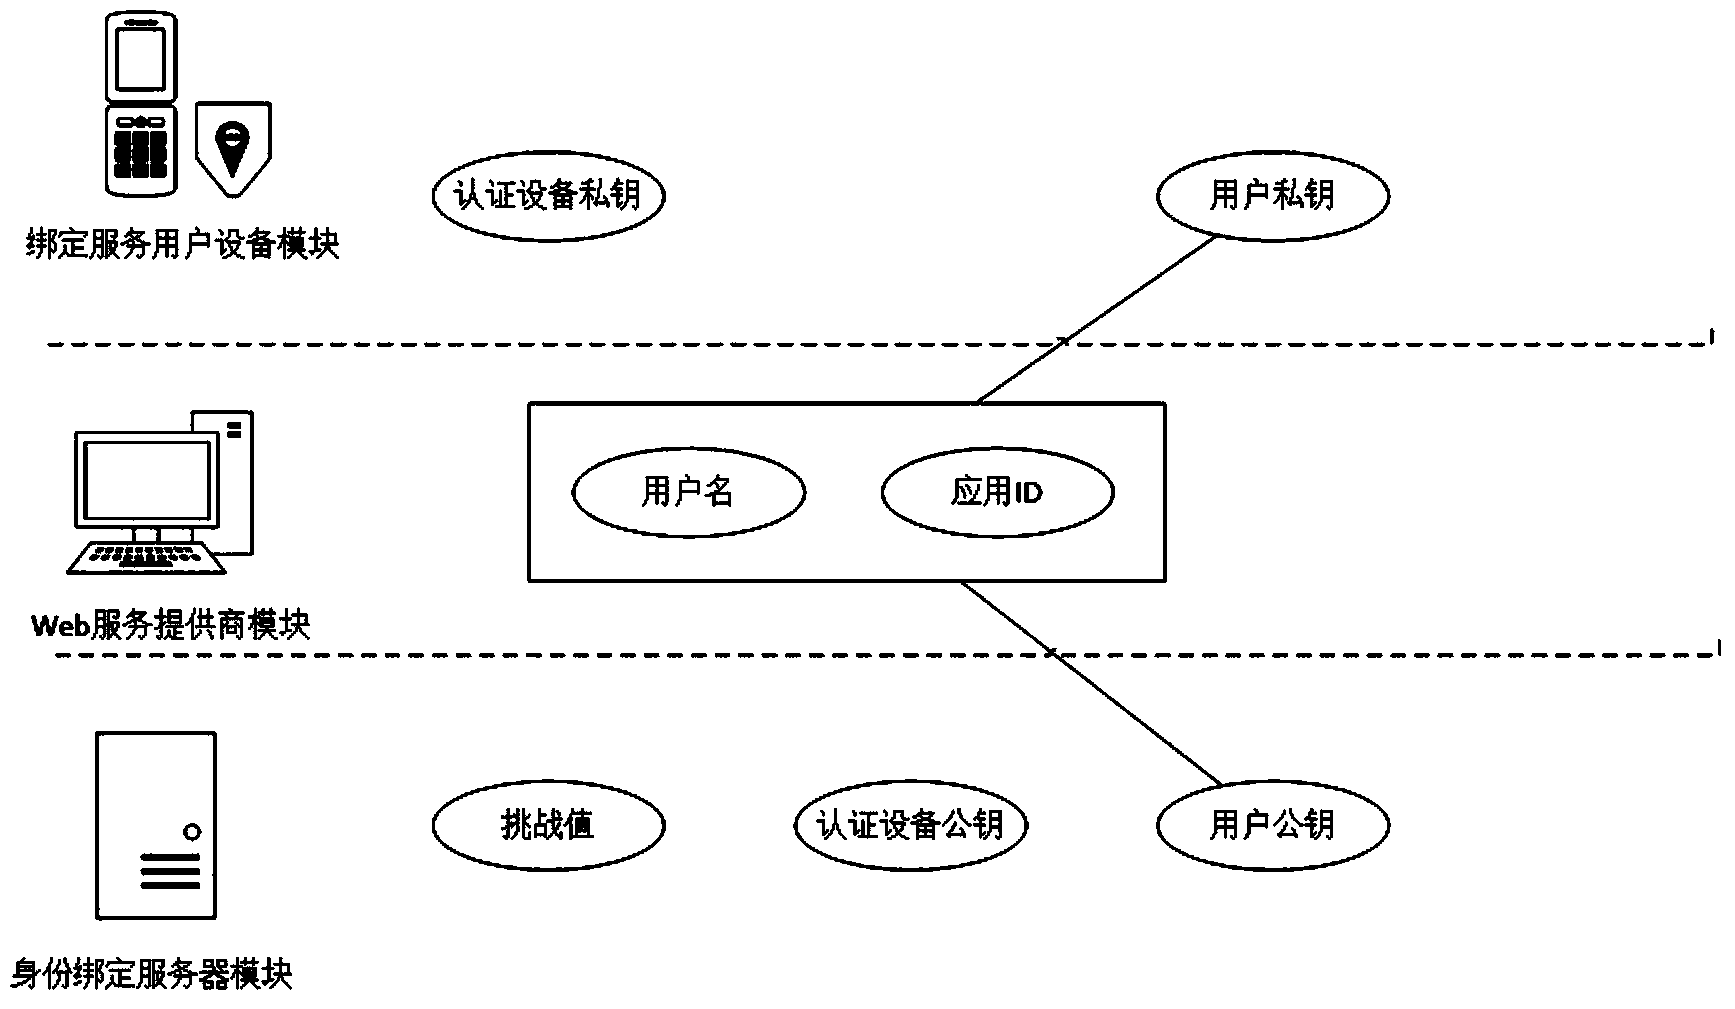 Multi-SP safety binding implementation method based on intelligent terminal local authentication